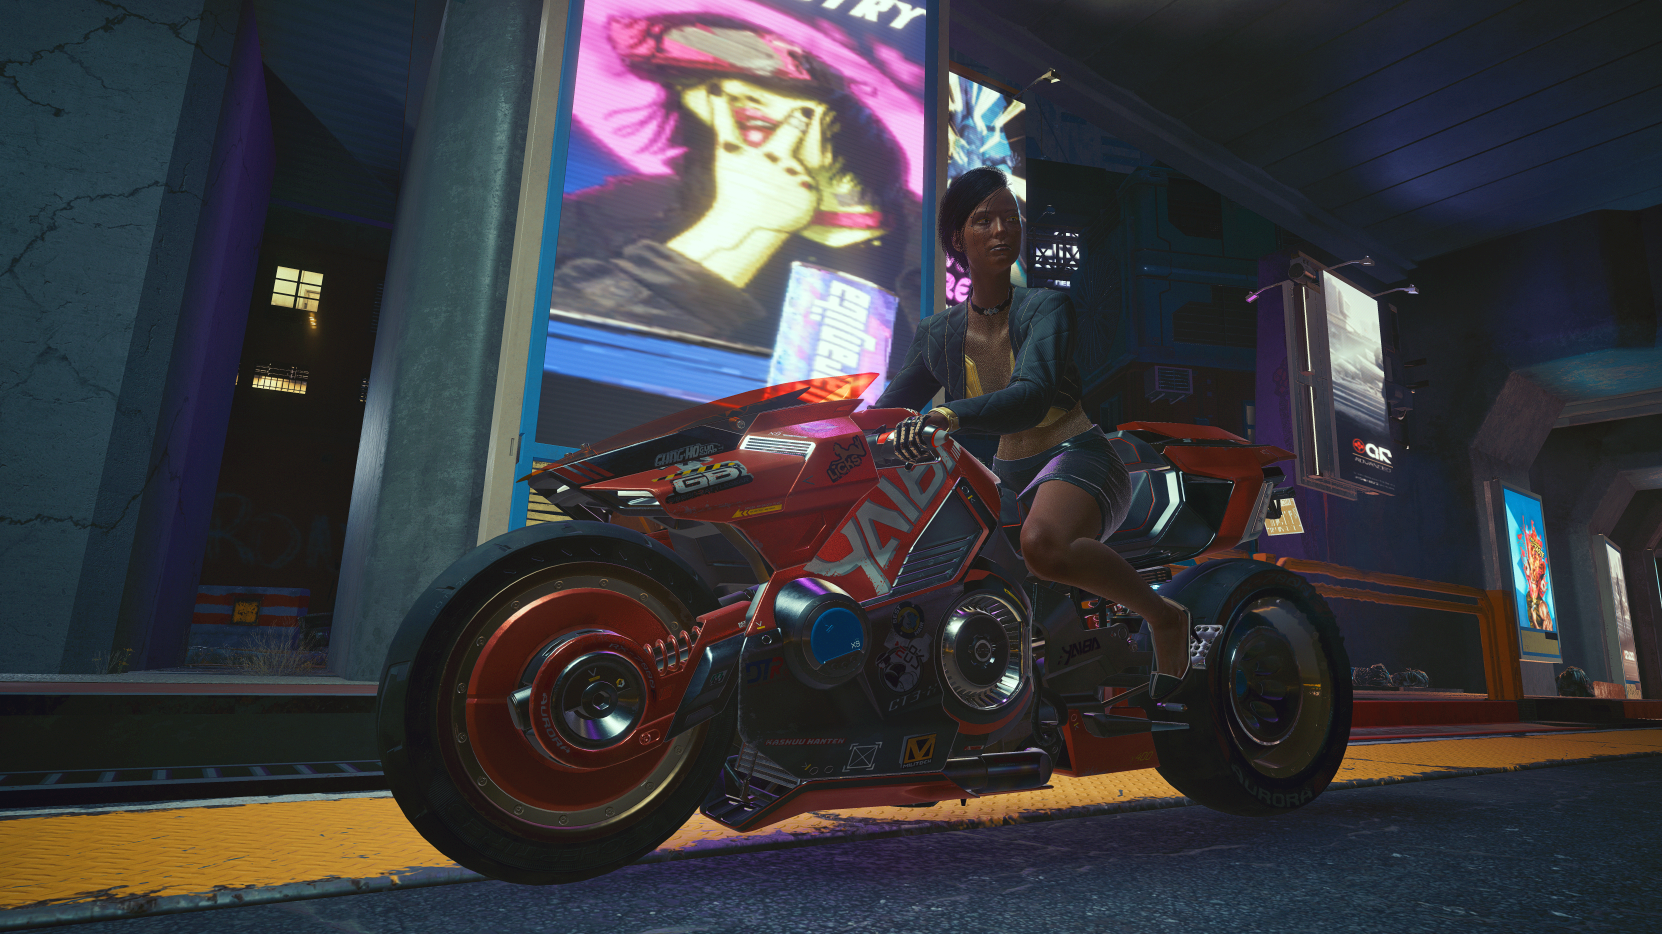 Forget ray tracing, Cyberpunk 2077 path tracing is coming to PC